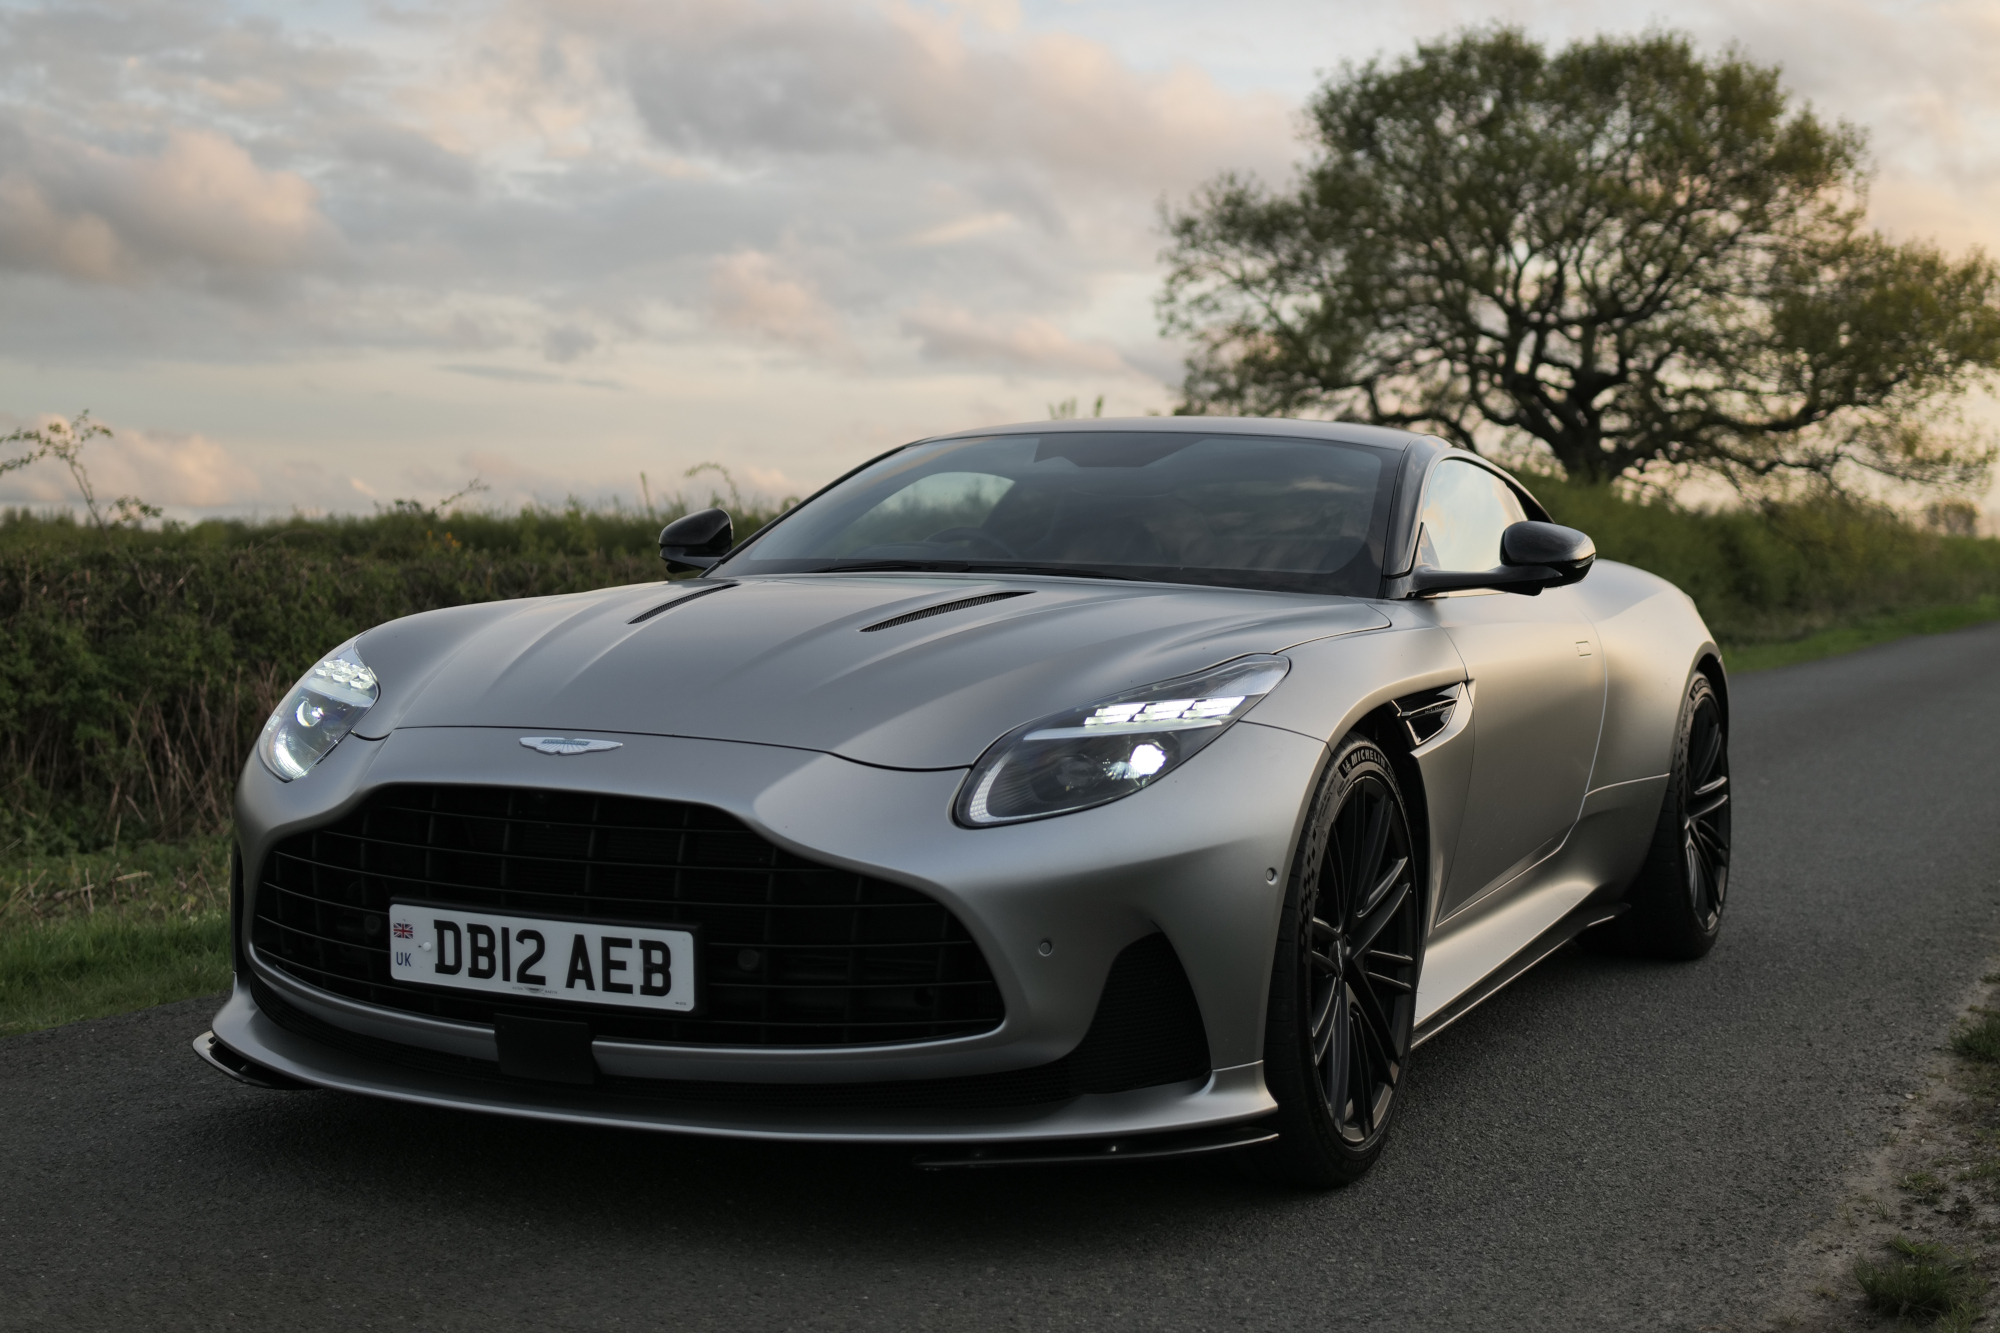 Aston Martin DB12 review: beauty, brawn, and now brains as well [Video]